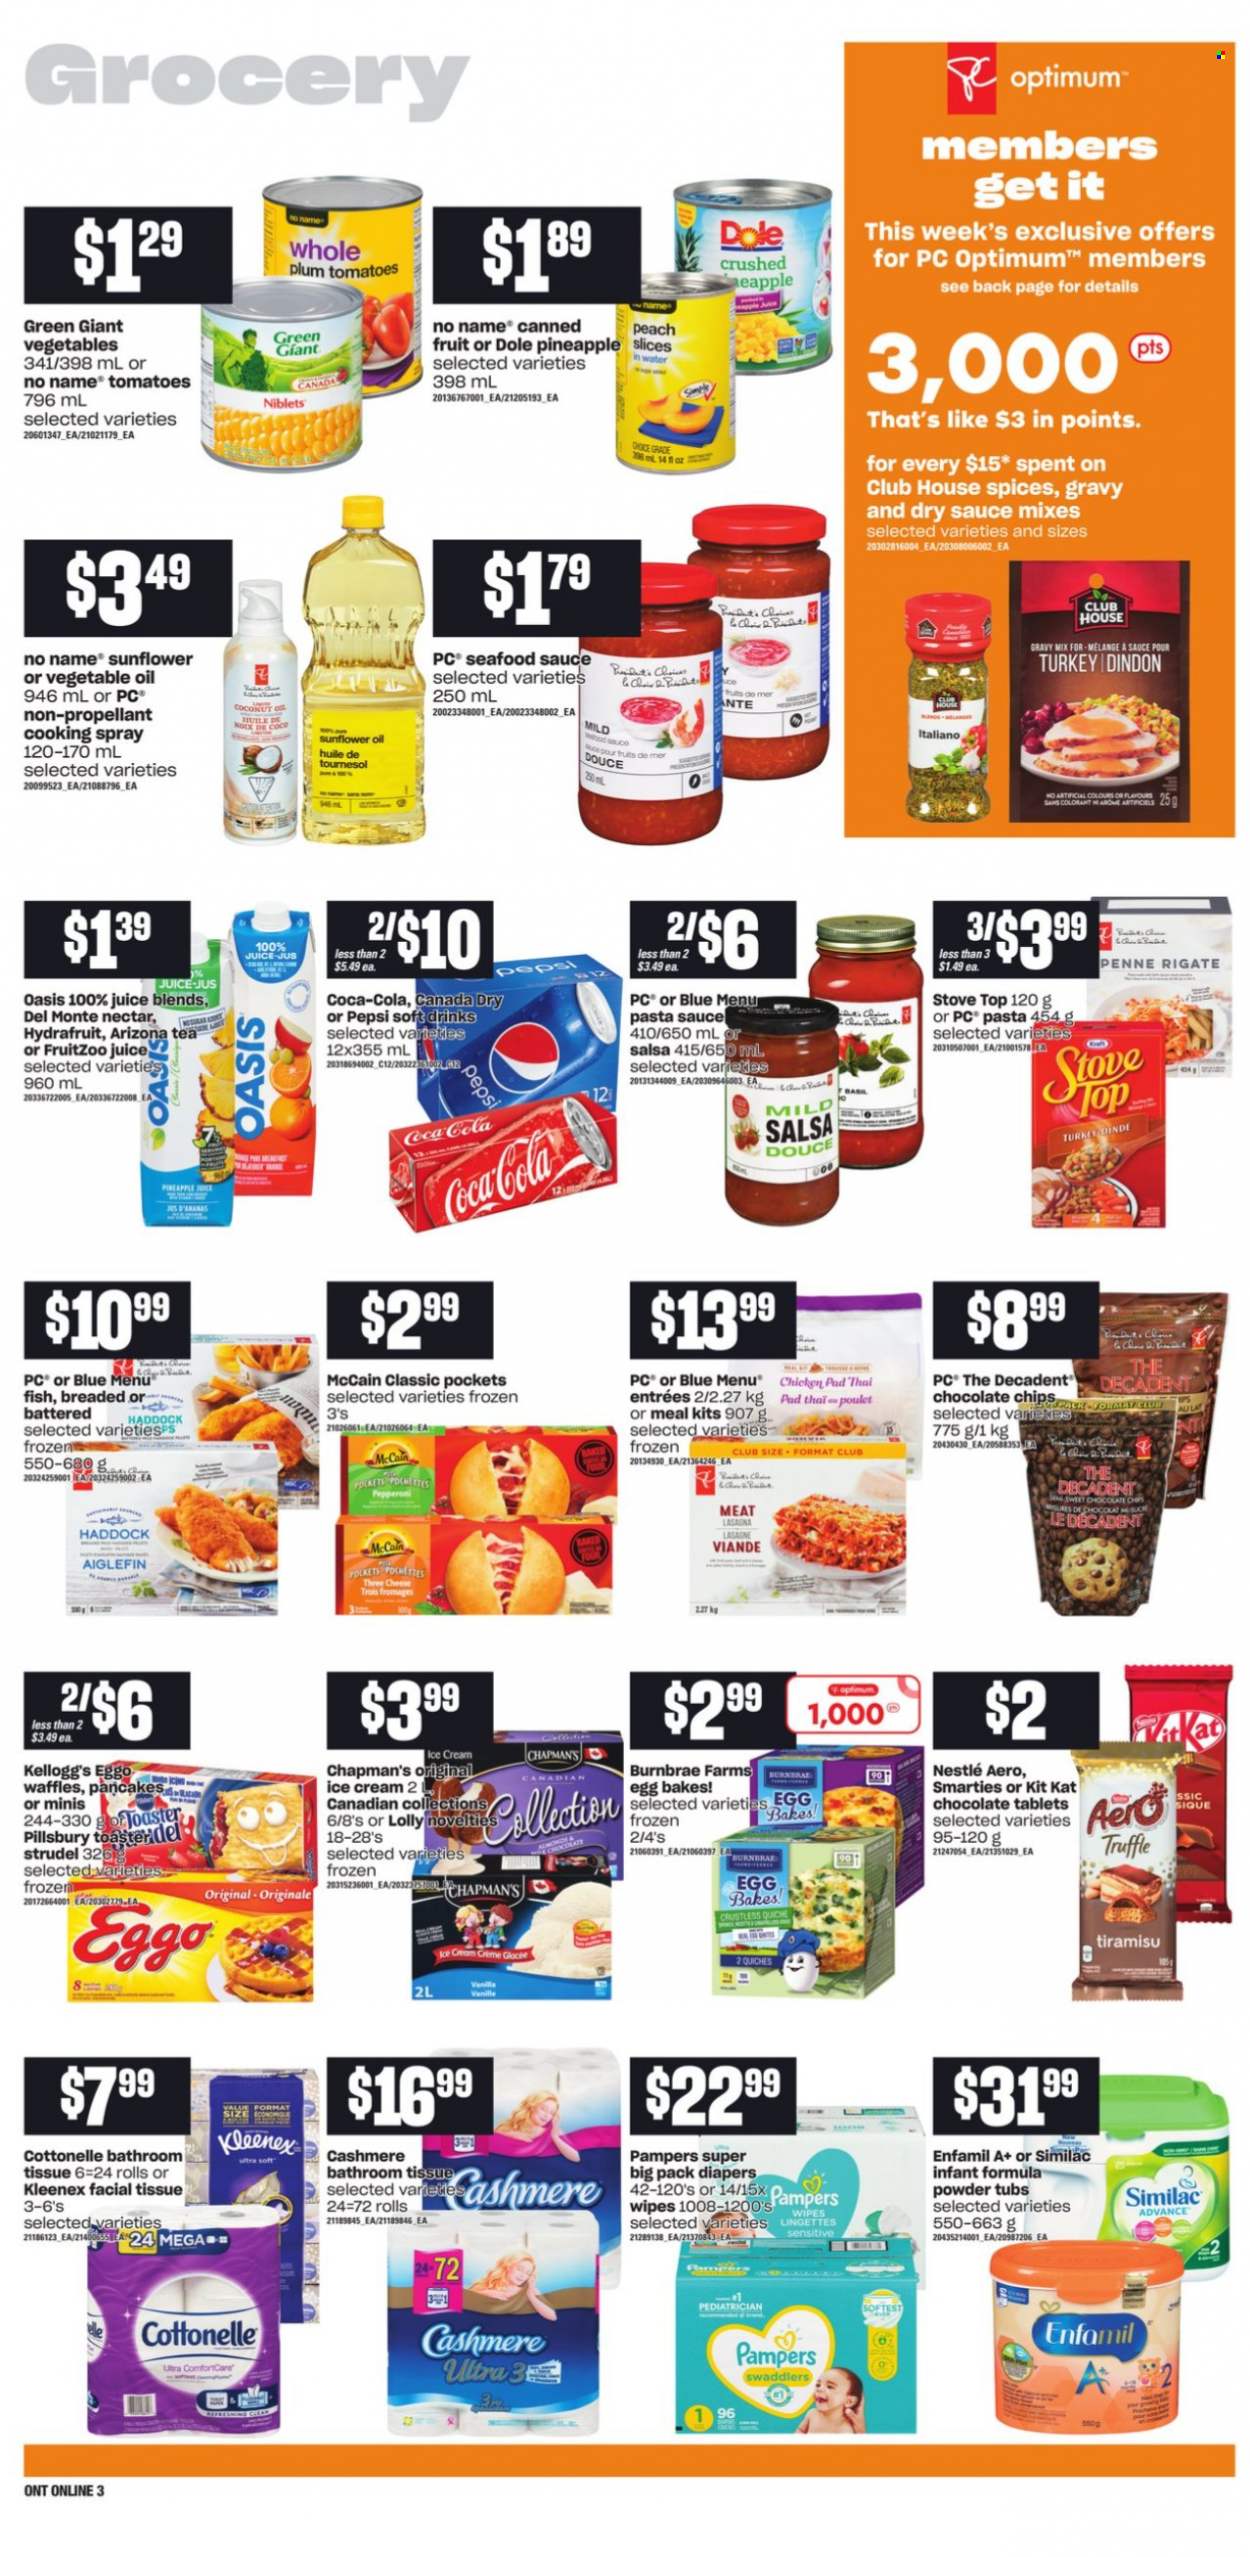 thumbnail - Loblaws Flyer - October 07, 2021 - October 13, 2021 - Sales products - strudel, waffles, tiramisu, tomatoes, Dole, pineapple, coconut, haddock, seafood, fish, No Name, pasta sauce, sauce, Pillsbury, lasagna meal, pepperoni, cheese, eggs, ice cream, McCain, truffles, KitKat, lollipop, Kellogg's, canned fruit, penne, gravy mix, salsa, cooking spray, sunflower oil, oil, Canada Dry, Coca-Cola, Pepsi, juice, soft drink, AriZona, tea, Enfamil, Similac, wipes, nappies, bath tissue, Cottonelle, Kleenex, Optimum, Nestlé, Pampers, Smarties. Page 9.